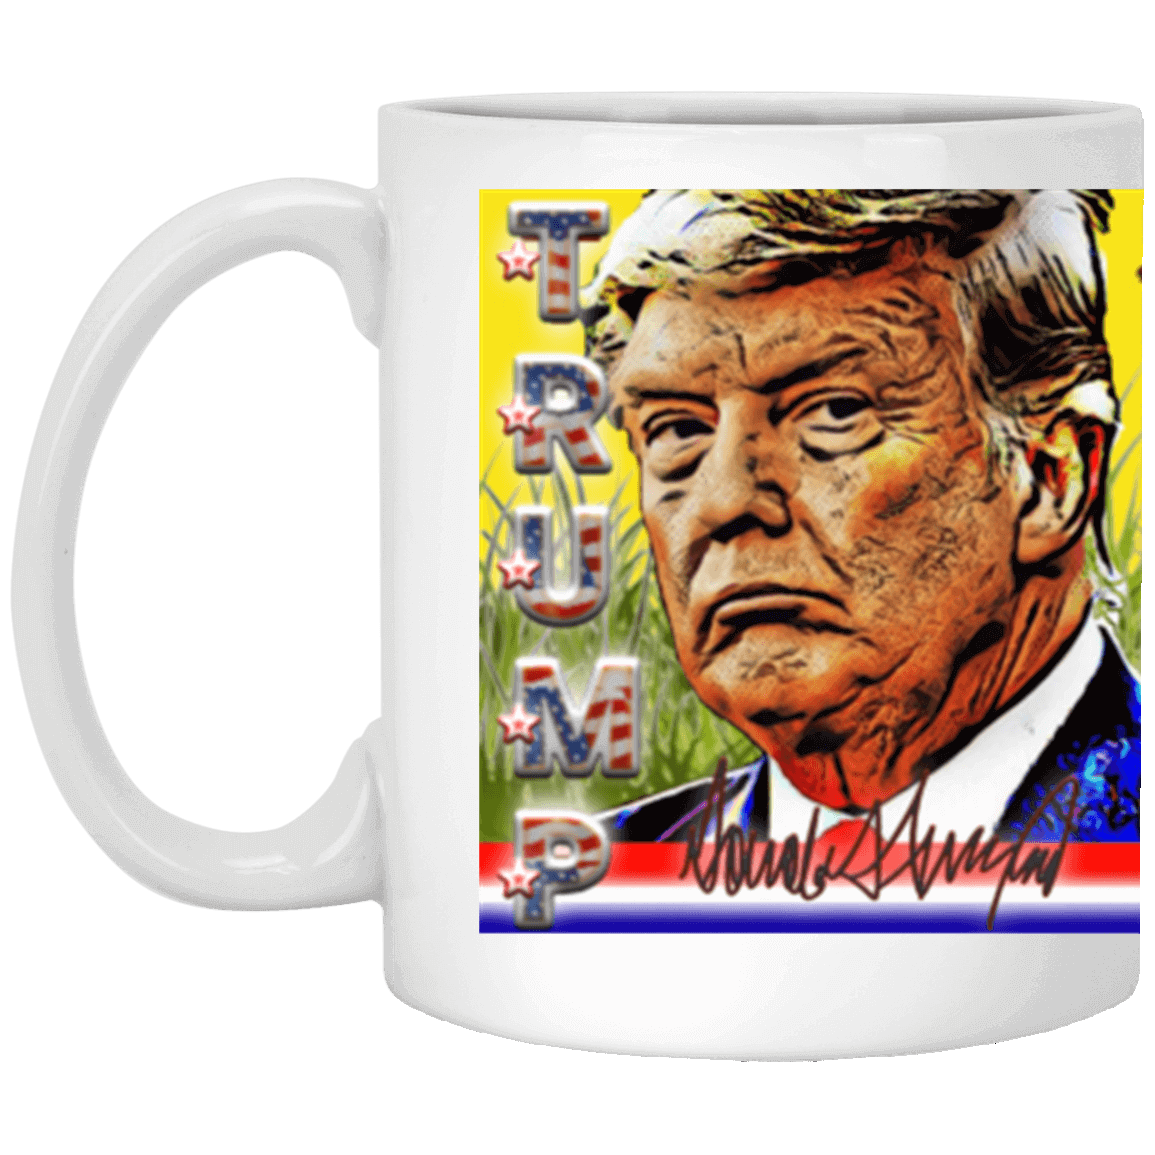 Official MAGA Trump VIP Shop gift mug with Don't Tread On Me axiom over red, white and blue stars and stripes in retro style.